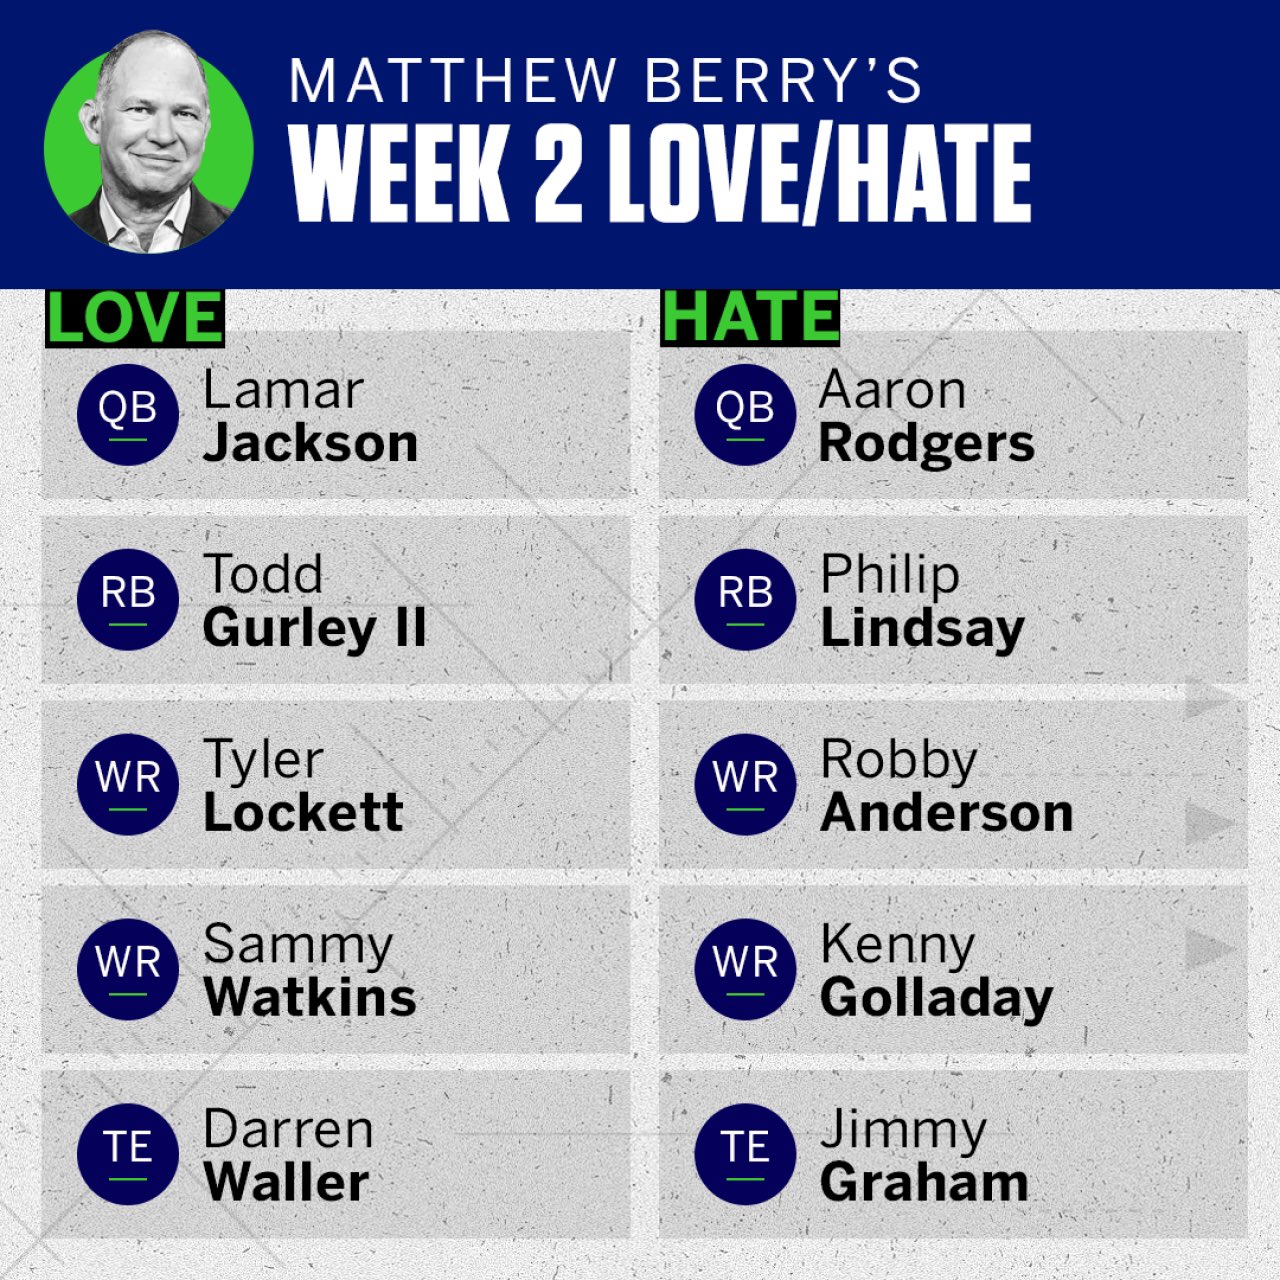 Matthew Berry on Twitter "Week 2 LOVEHATE and the players I believe